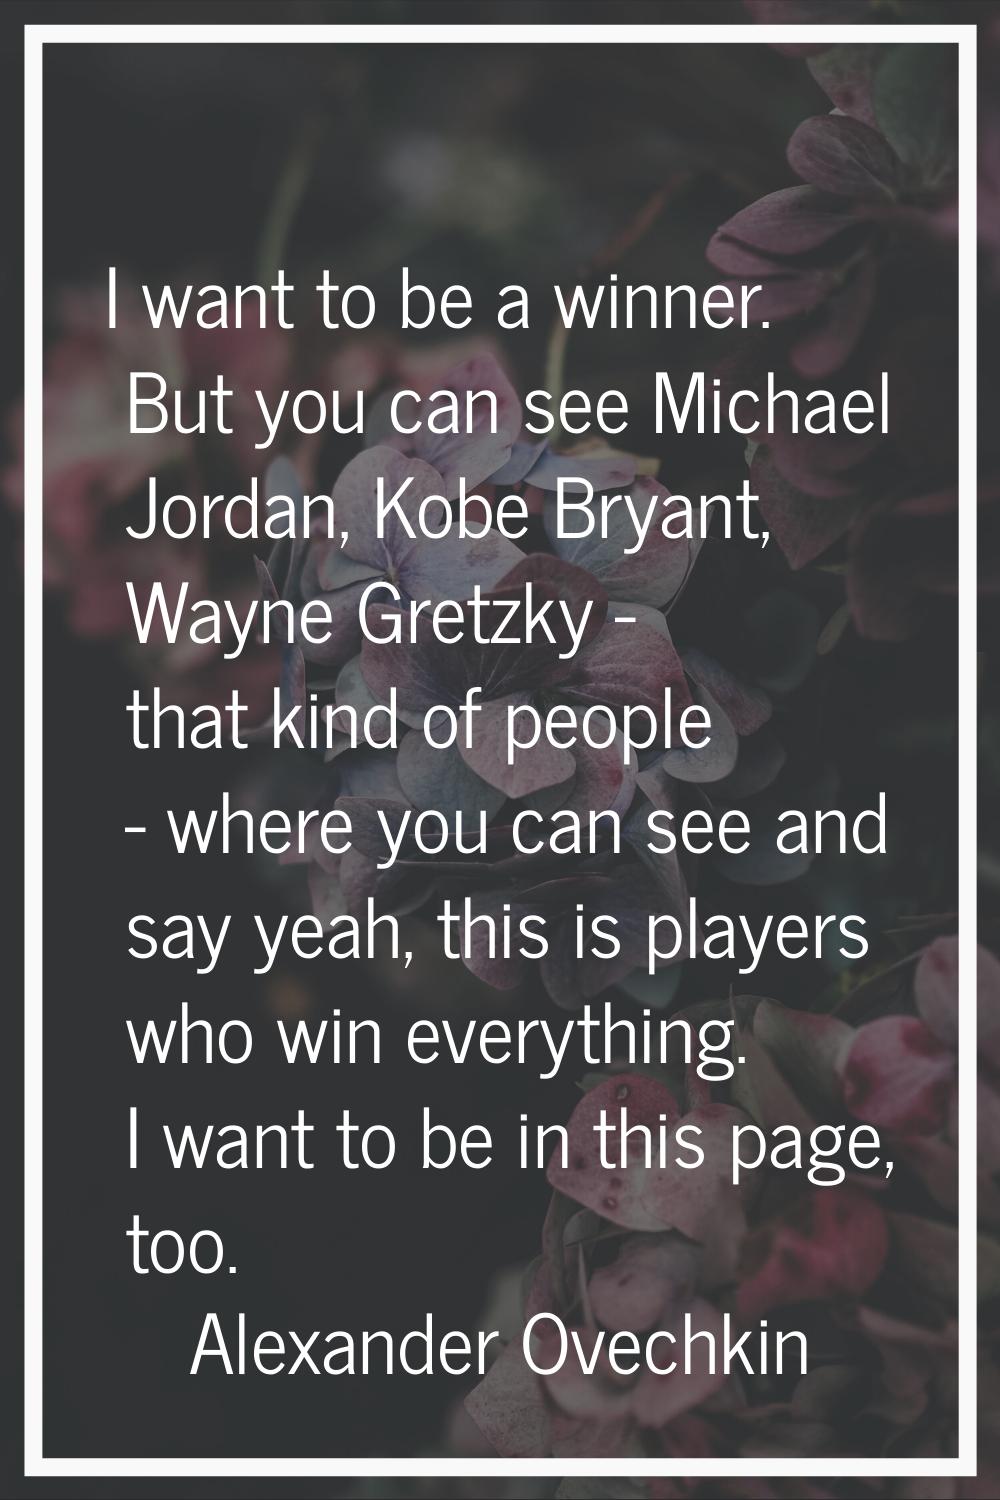 I want to be a winner. But you can see Michael Jordan, Kobe Bryant, Wayne Gretzky - that kind of pe